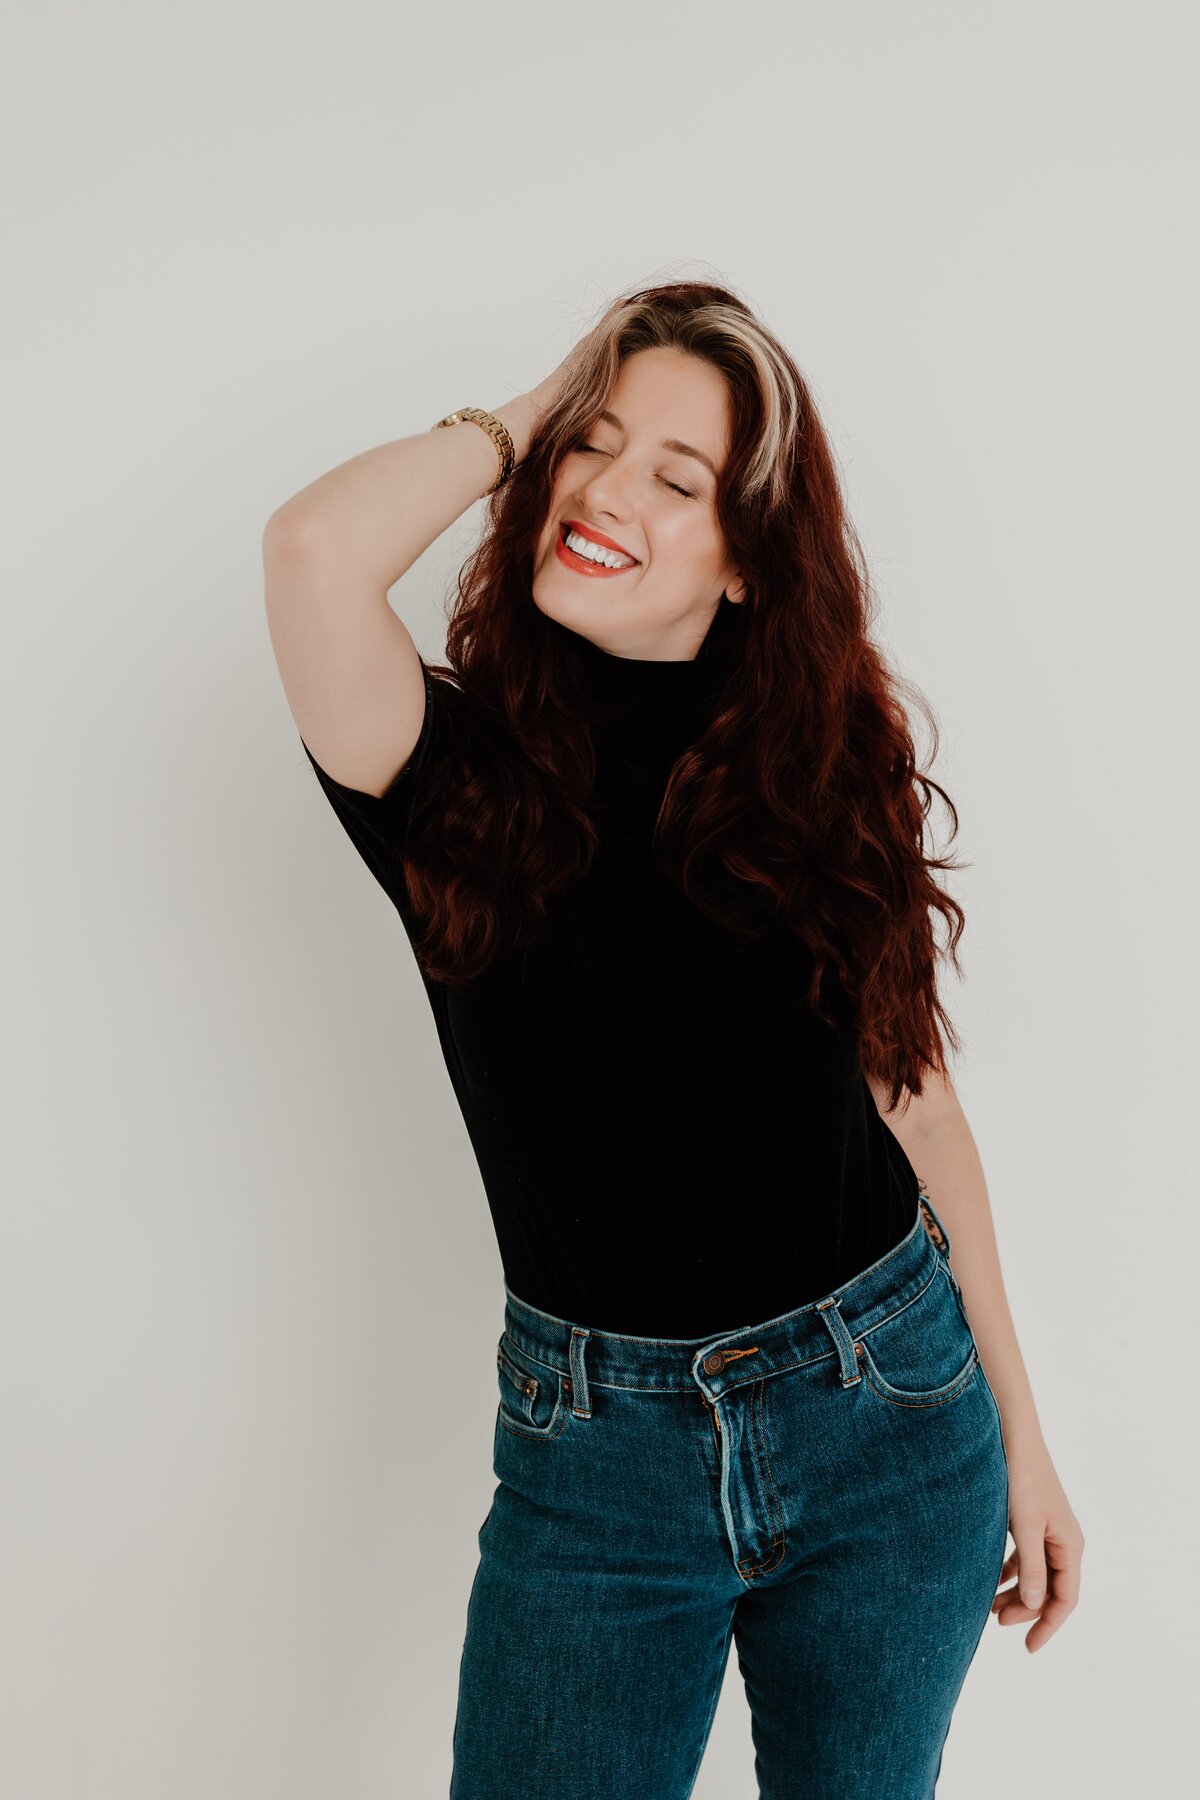 A joyful woman with long wavy red hair, wearing a black turtleneck and blue jeans, playfully posing with her hand in her hair against a plain white background.